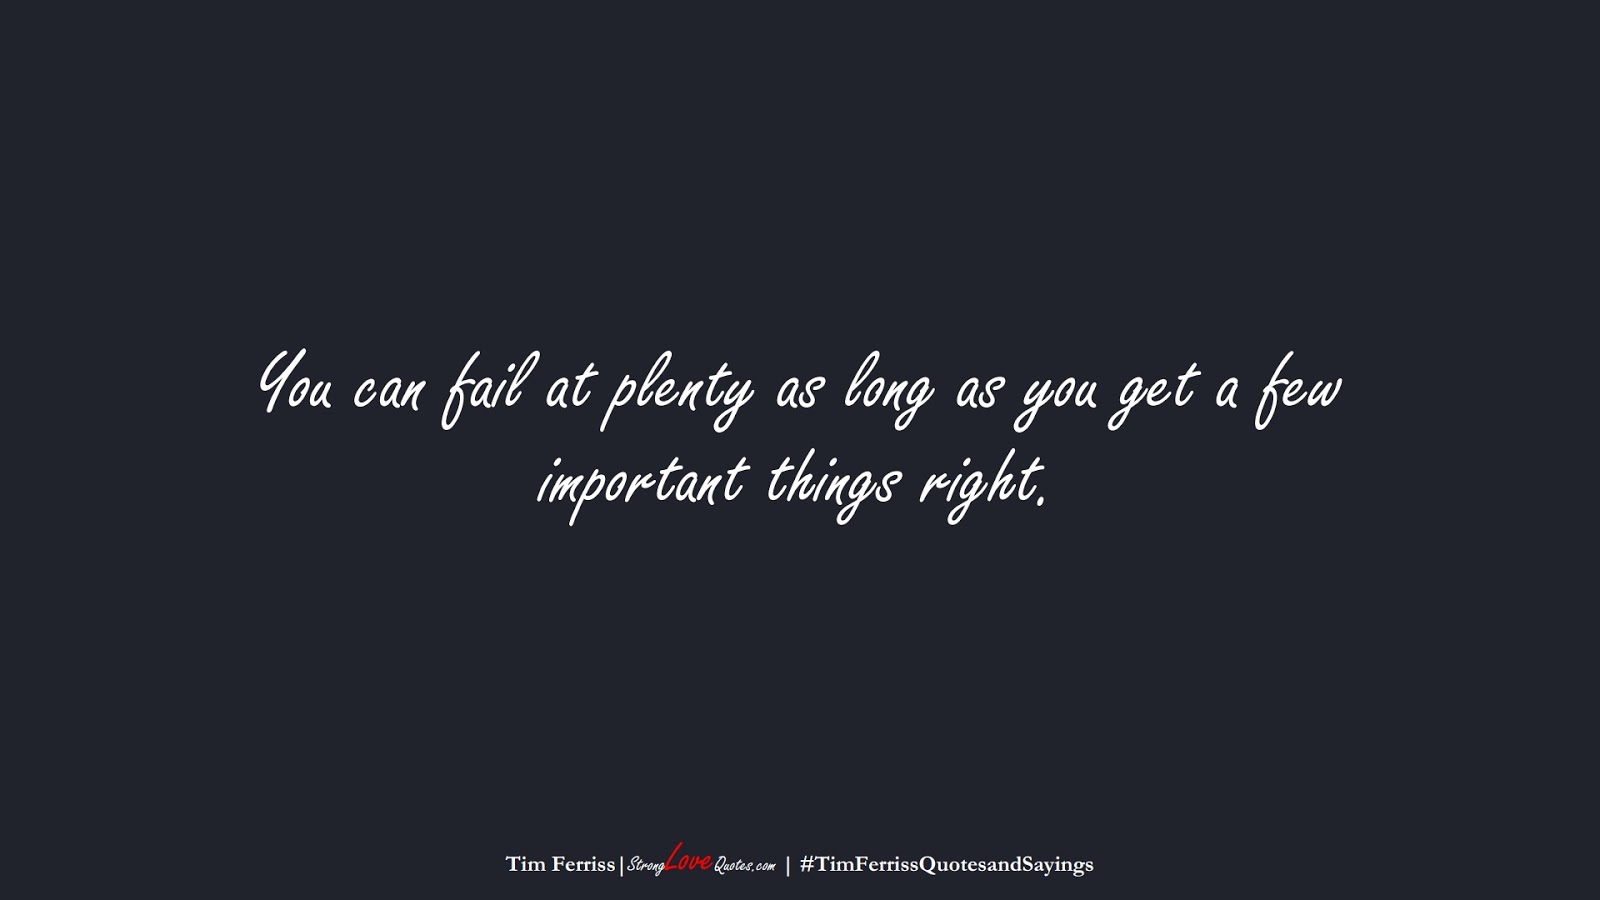 You can fail at plenty as long as you get a few important things right. (Tim Ferriss);  #TimFerrissQuotesandSayings